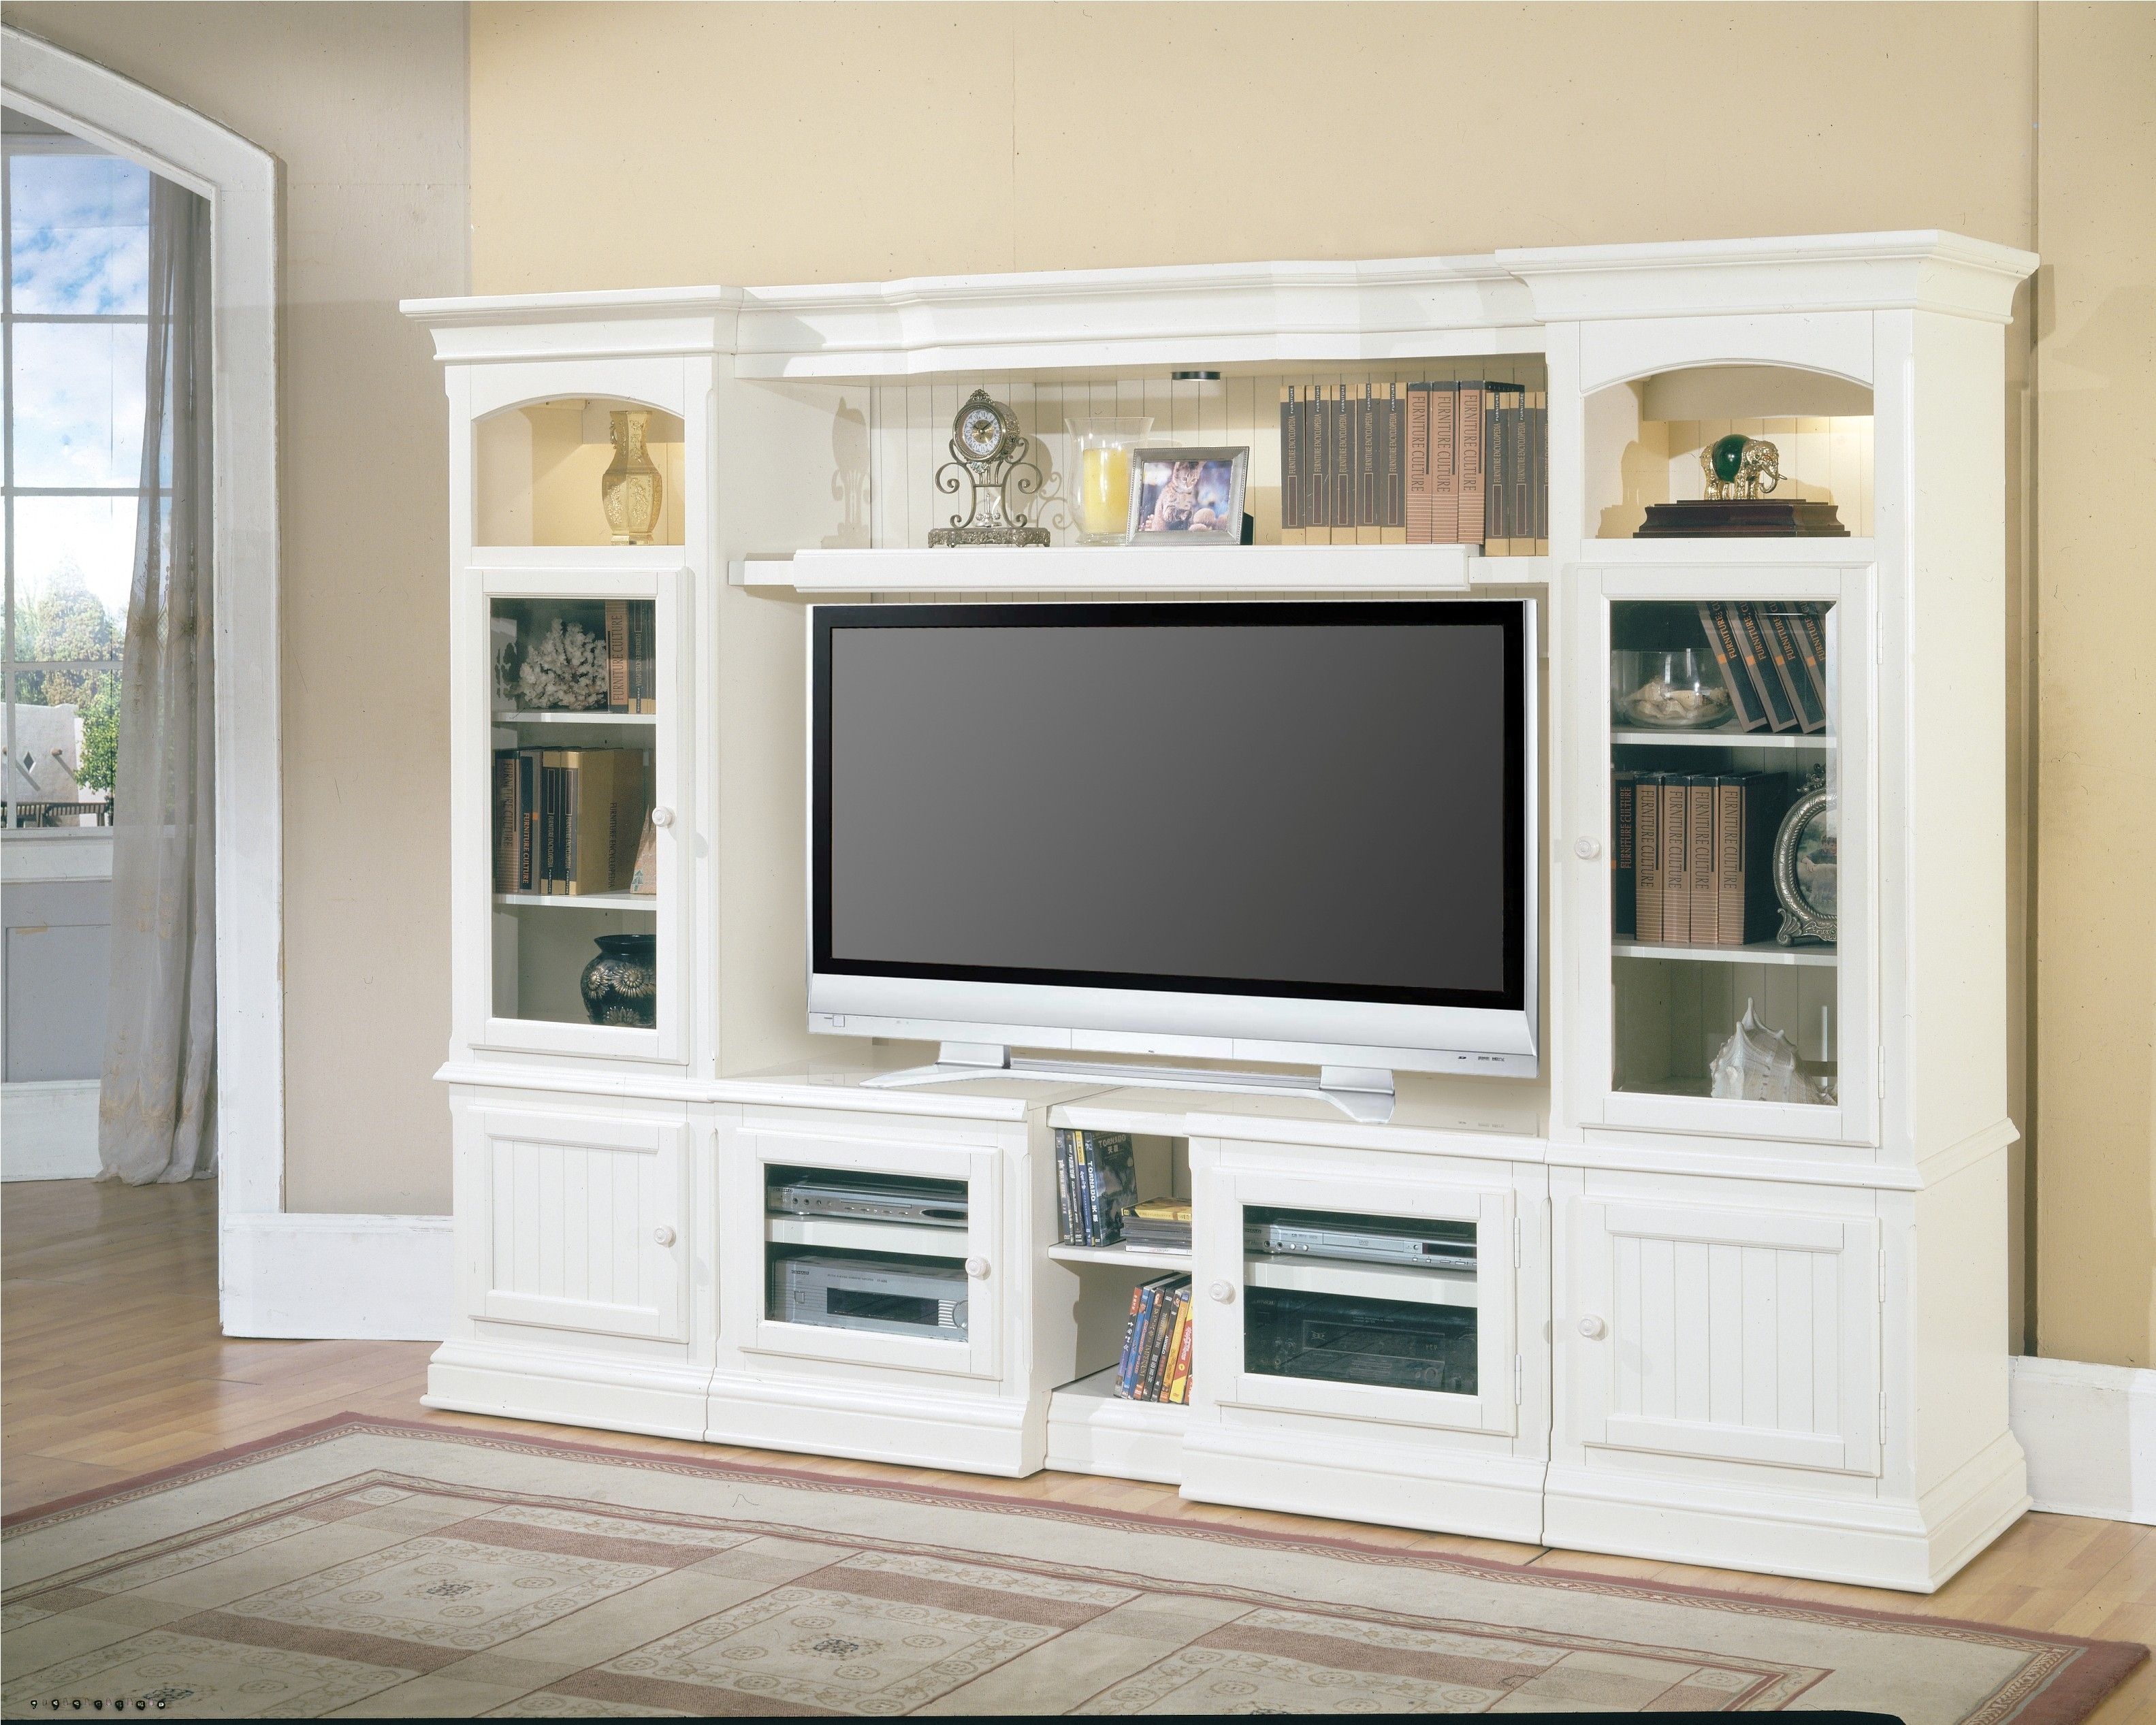 15 Collection of Tv Bookcases3167 x 2534